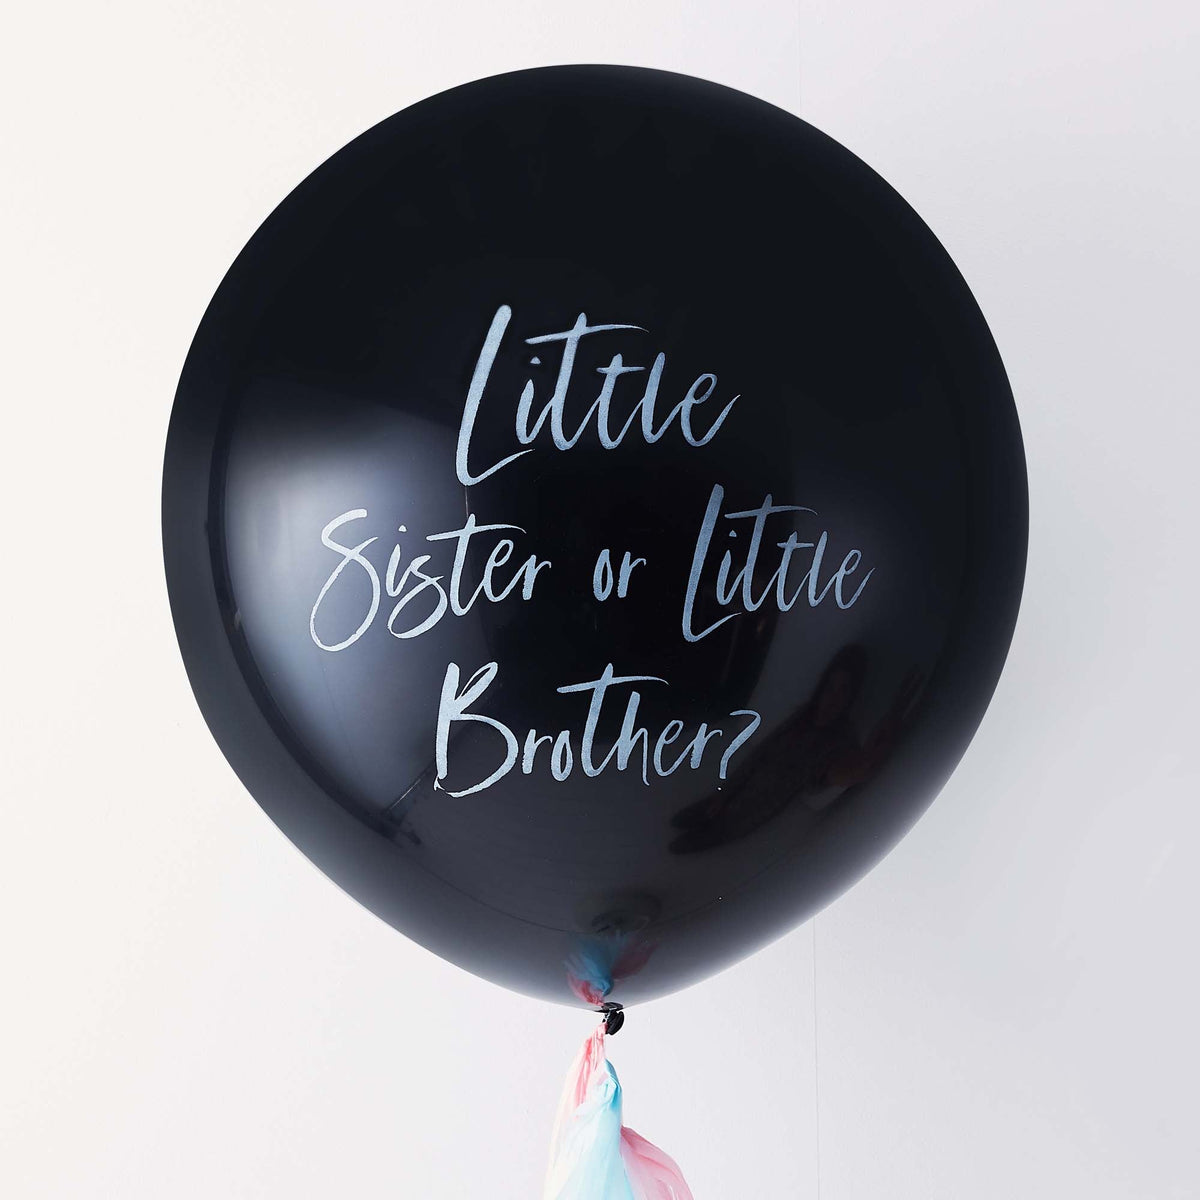 AMSCAN CA Baby Shower Gender Reveal Confetti Latex Balloon, 36 Inches, 1 Count